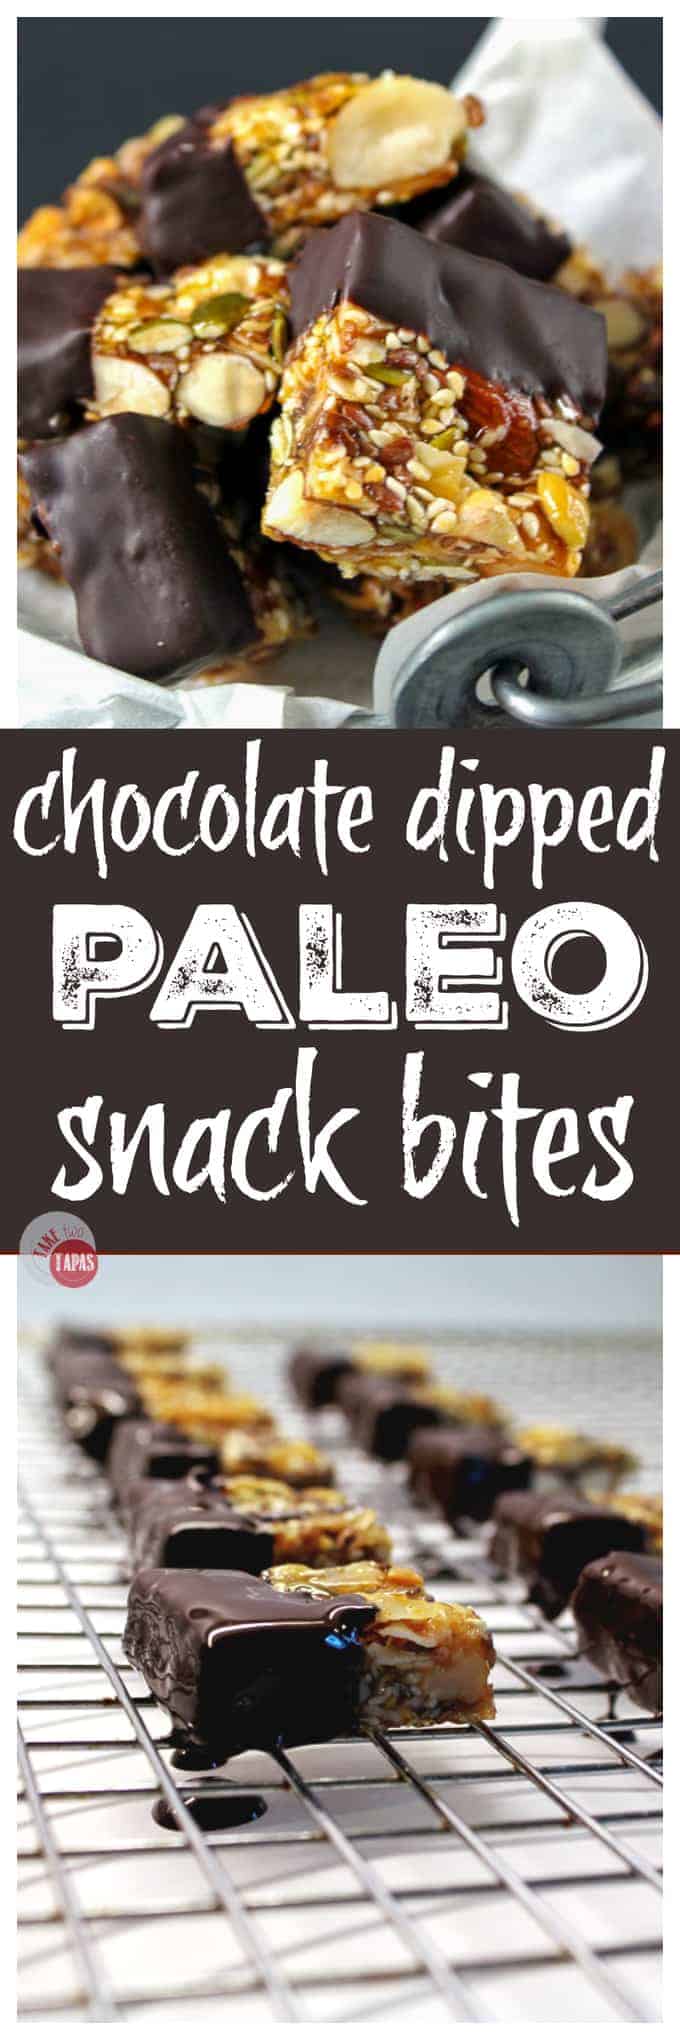 Pinterest collage image with text "Chocolate Dipped Paleo Snack Bites"